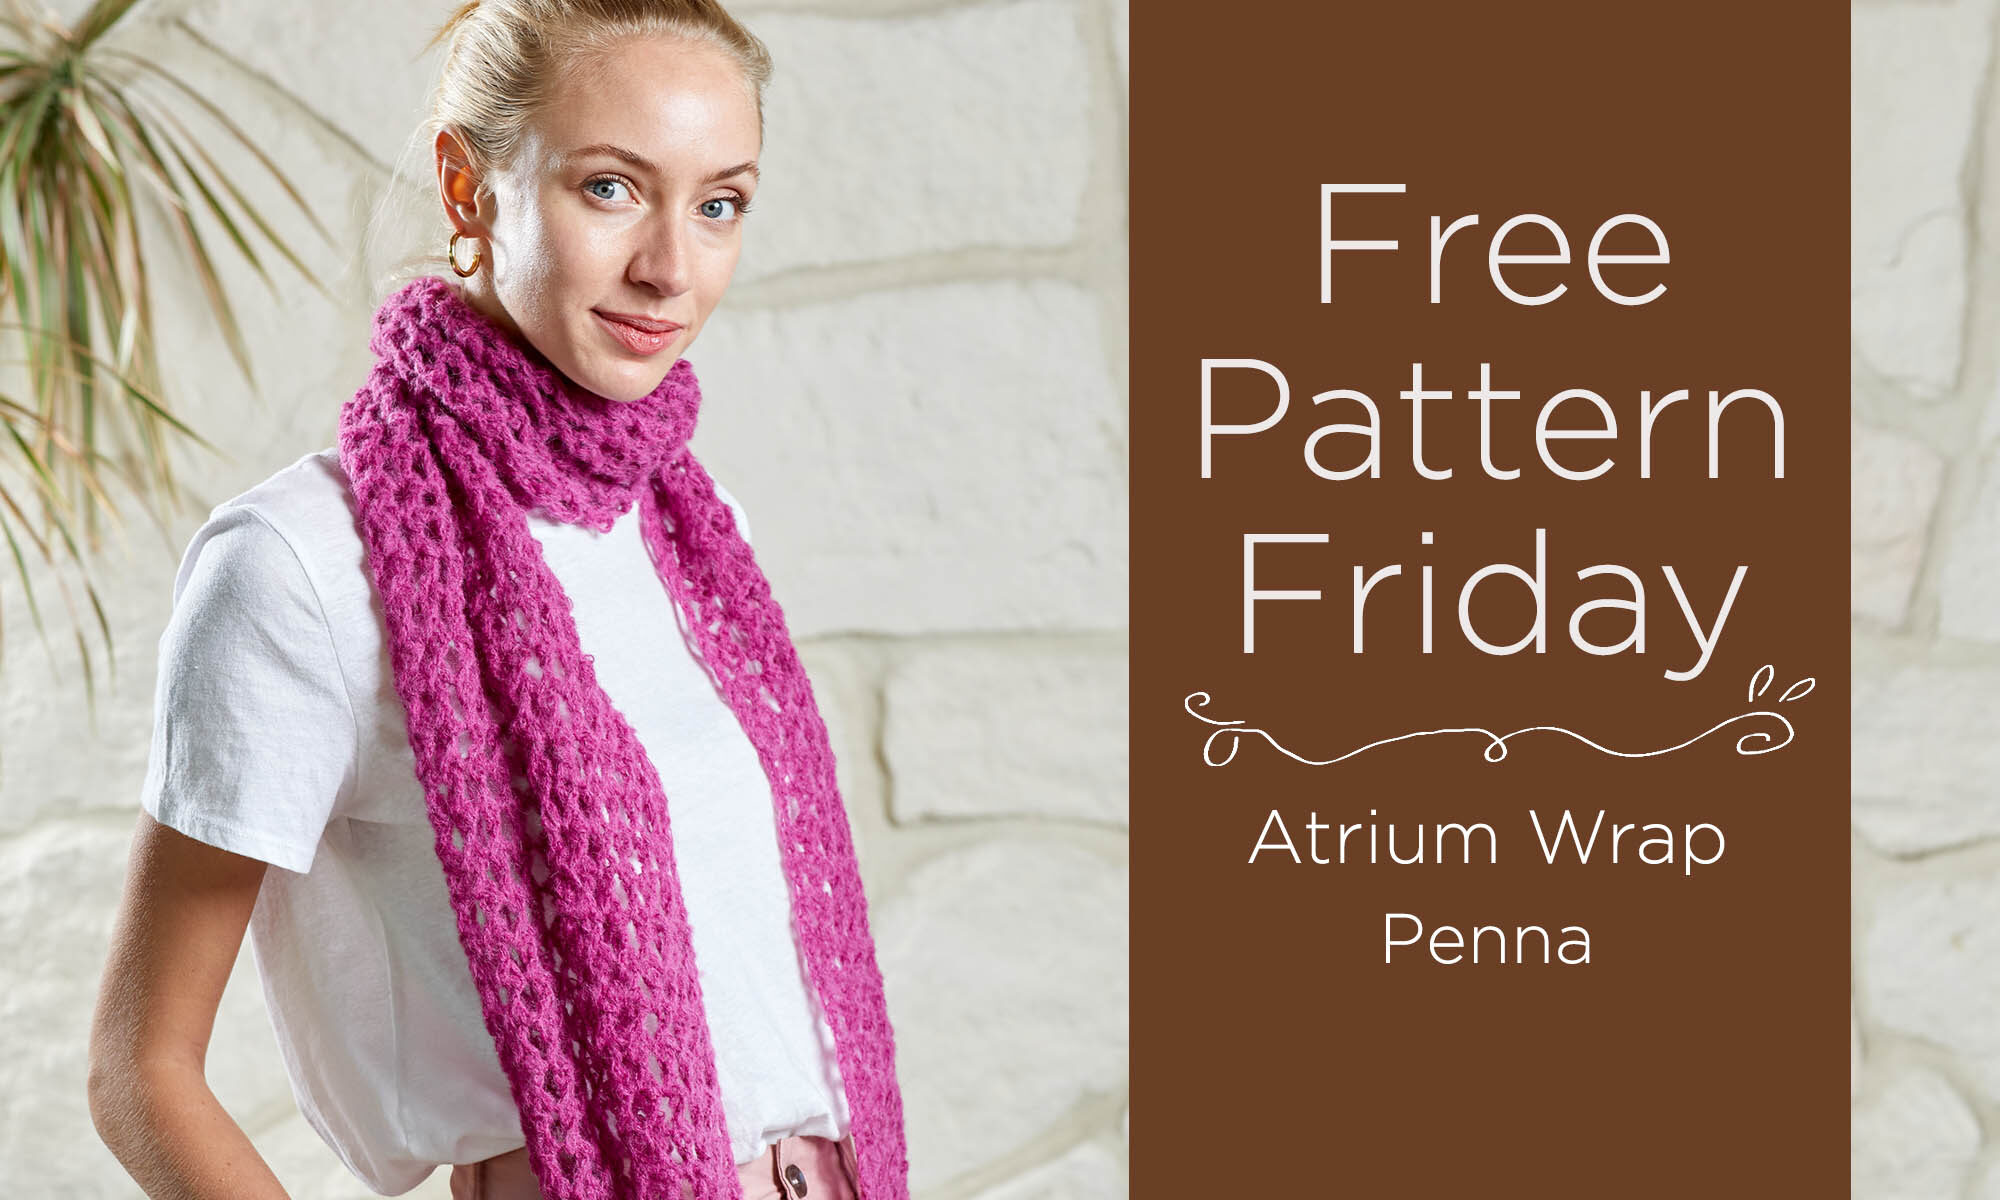 Image of woman wearing scarf. Text reads Free Pattern Friday, Atrium Wrap in Penna